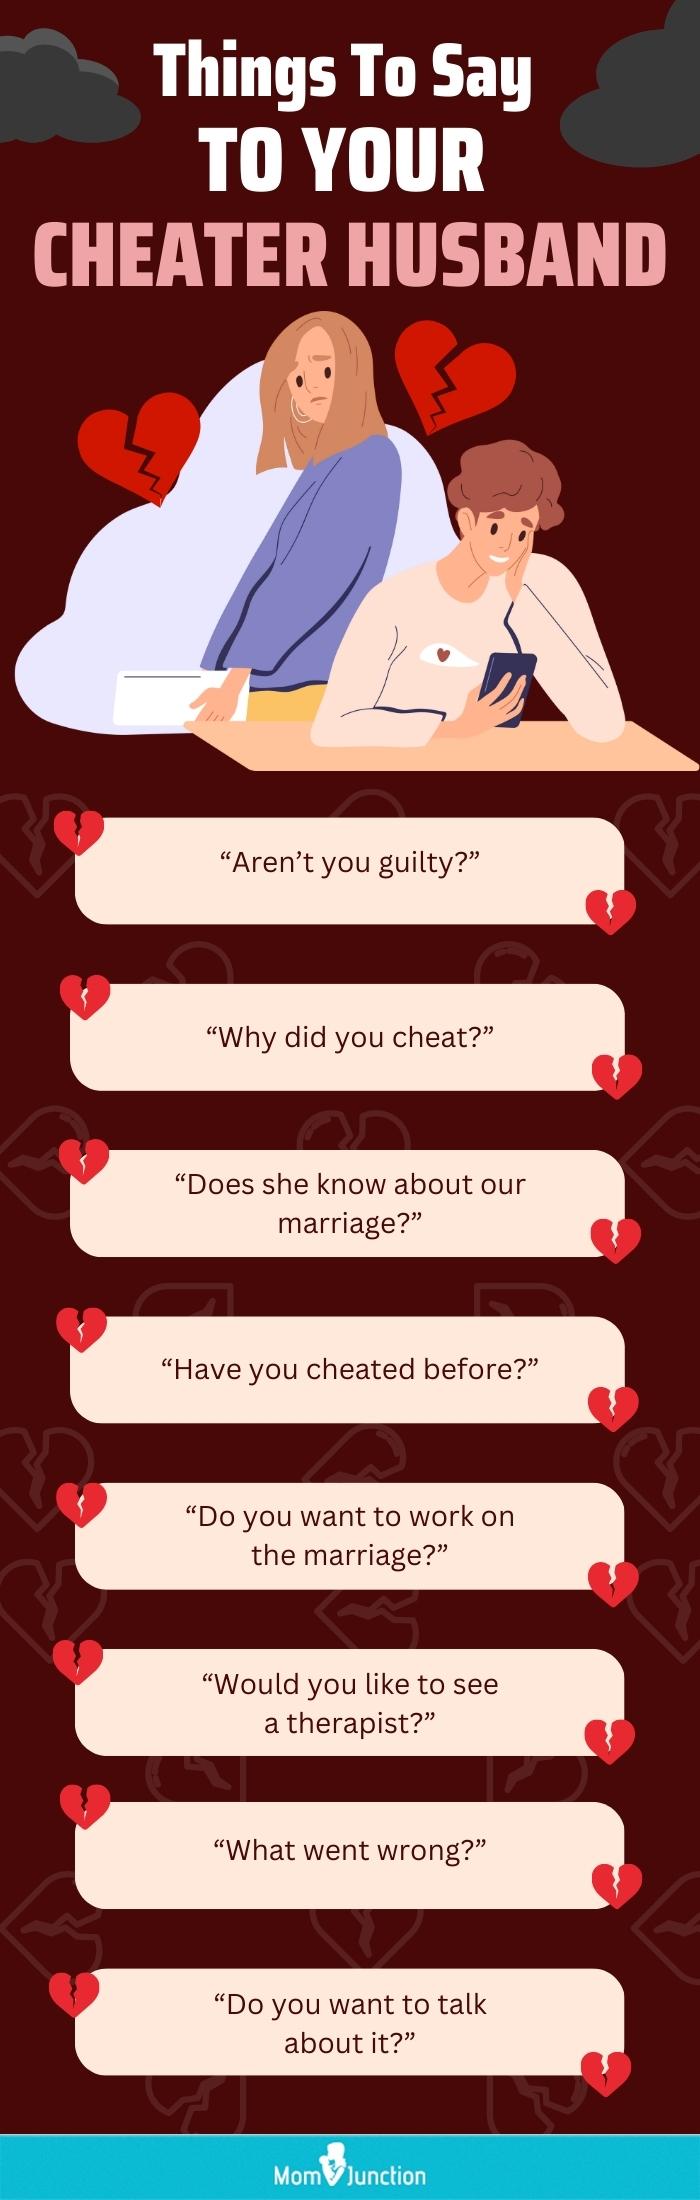 things to say to your cheater husband(infographic)